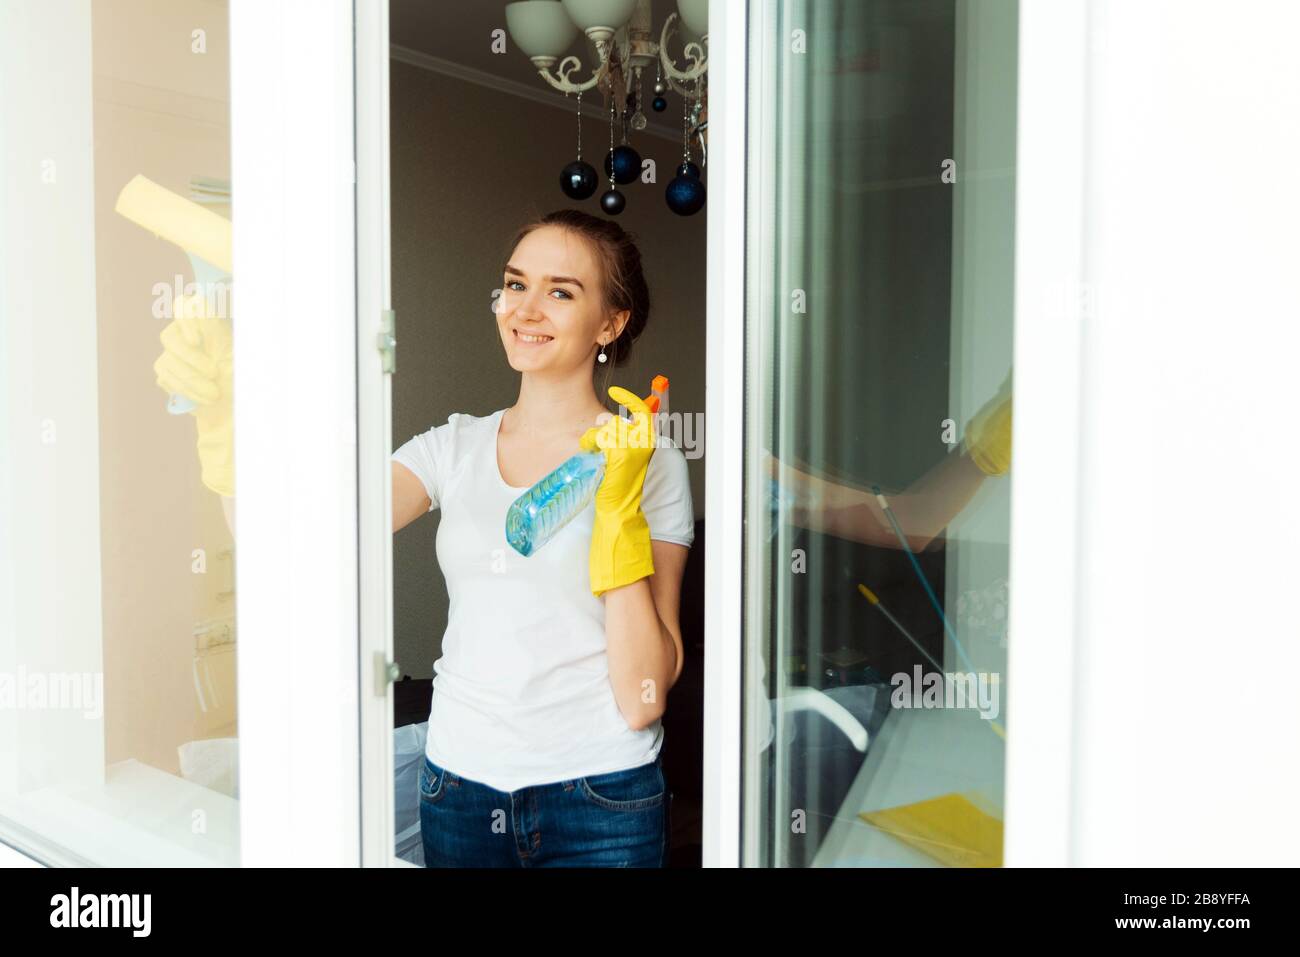 A cute adult female cleaning company worker wipes plastic windows in a house. The view from the outside. Stock Photo